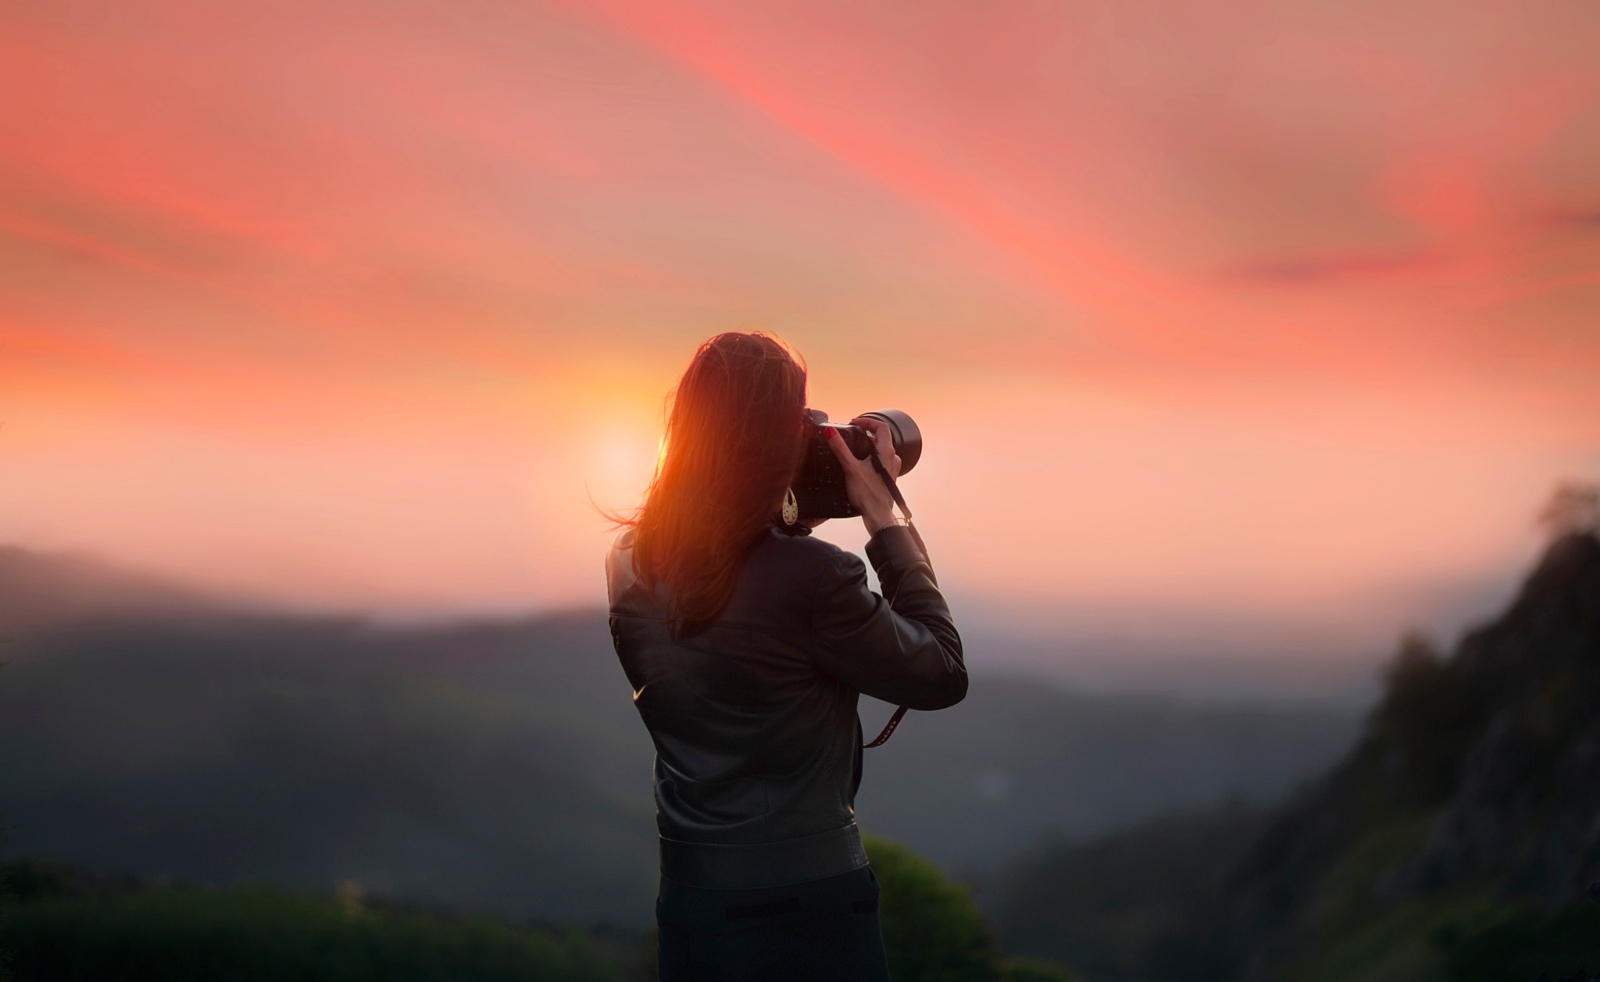 8 Ways Photography Can Improve Your Life